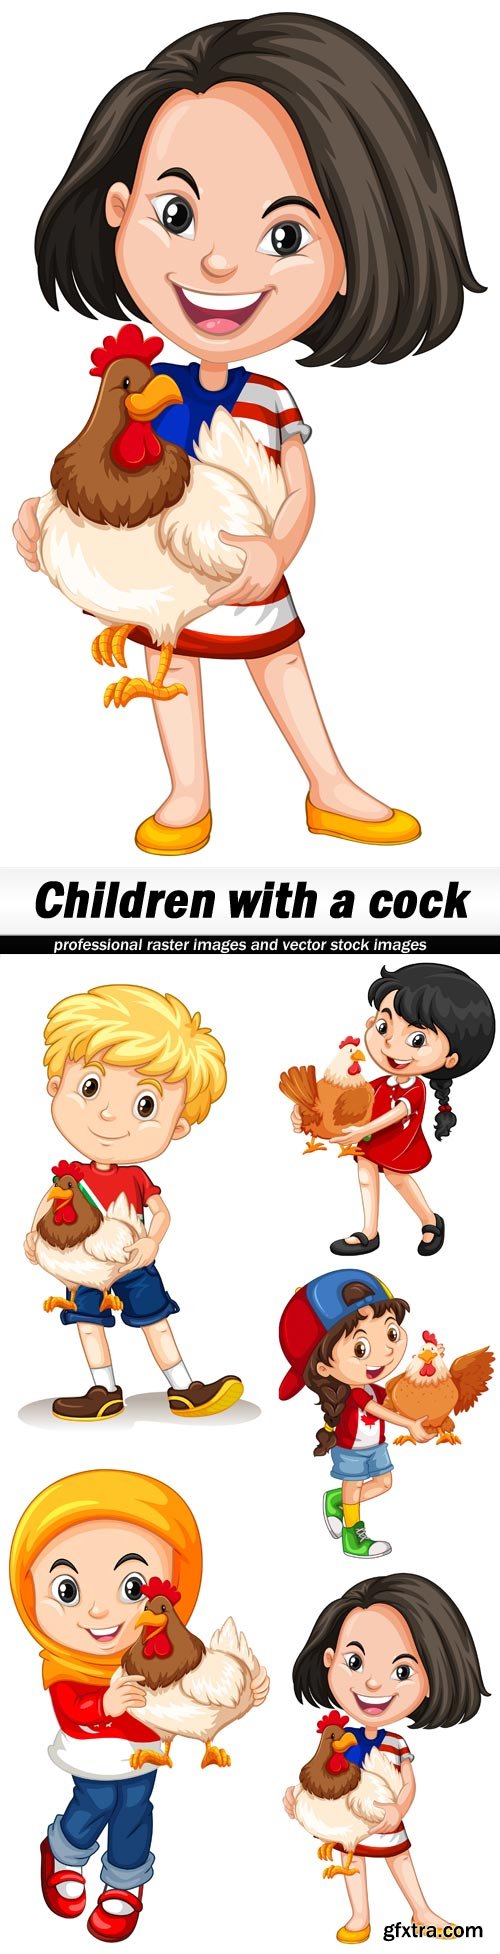 Children with a cock - 5 EPS